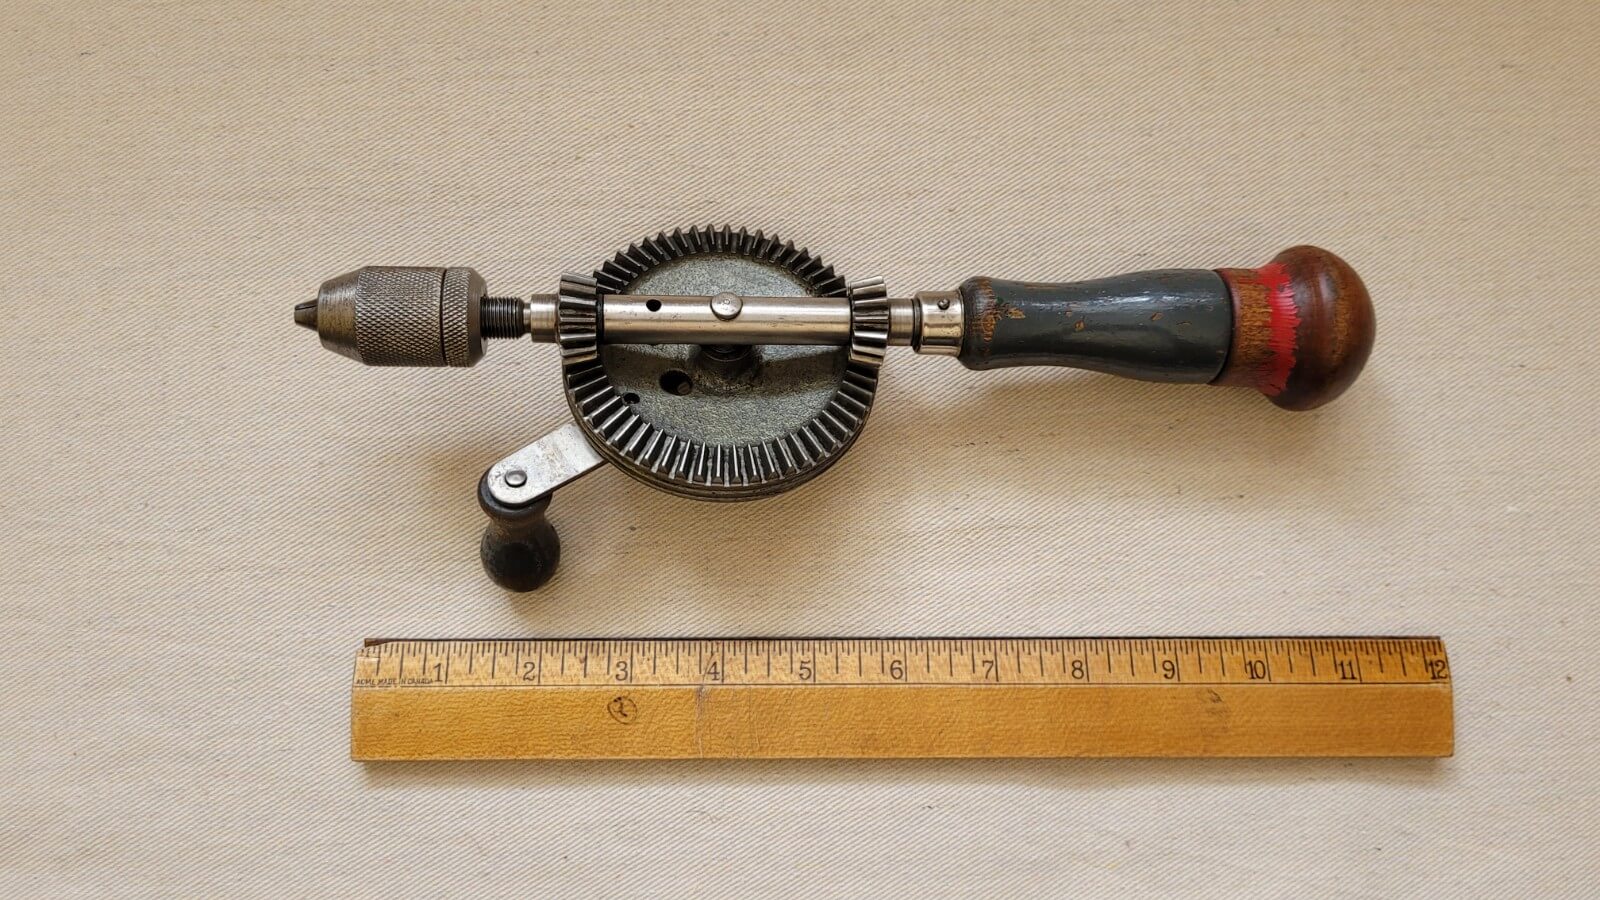 Rare vintage Stanley H122O HY-LO drive egg beater hand drill with screw on bit storage, collectible antique made in Canada woodworking tool